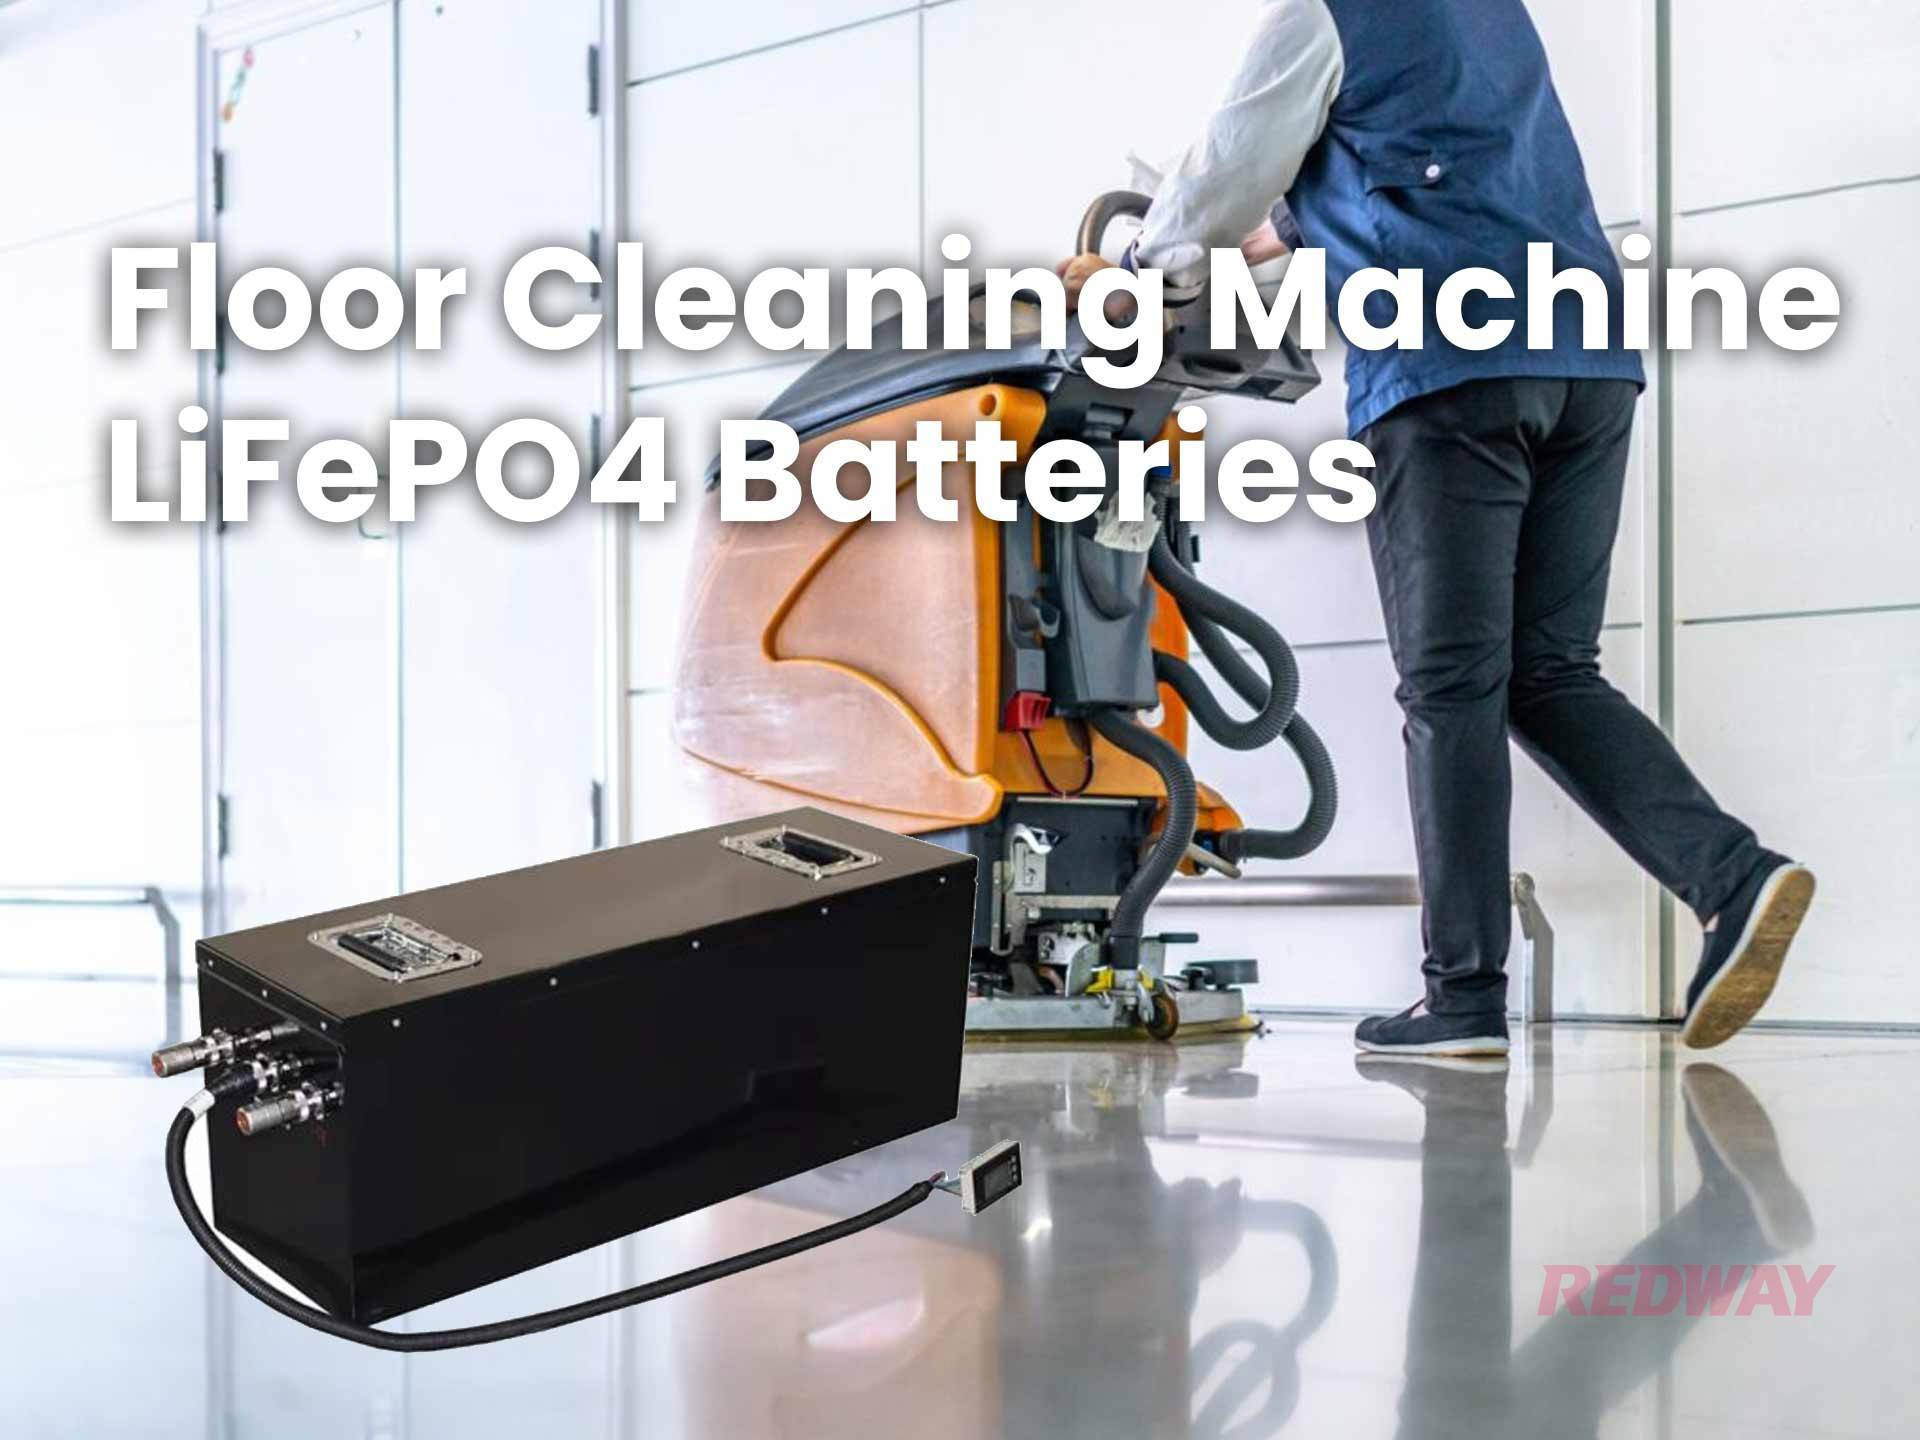 How to Switch to Lithium Batteries for Your Floor Cleaning Machines